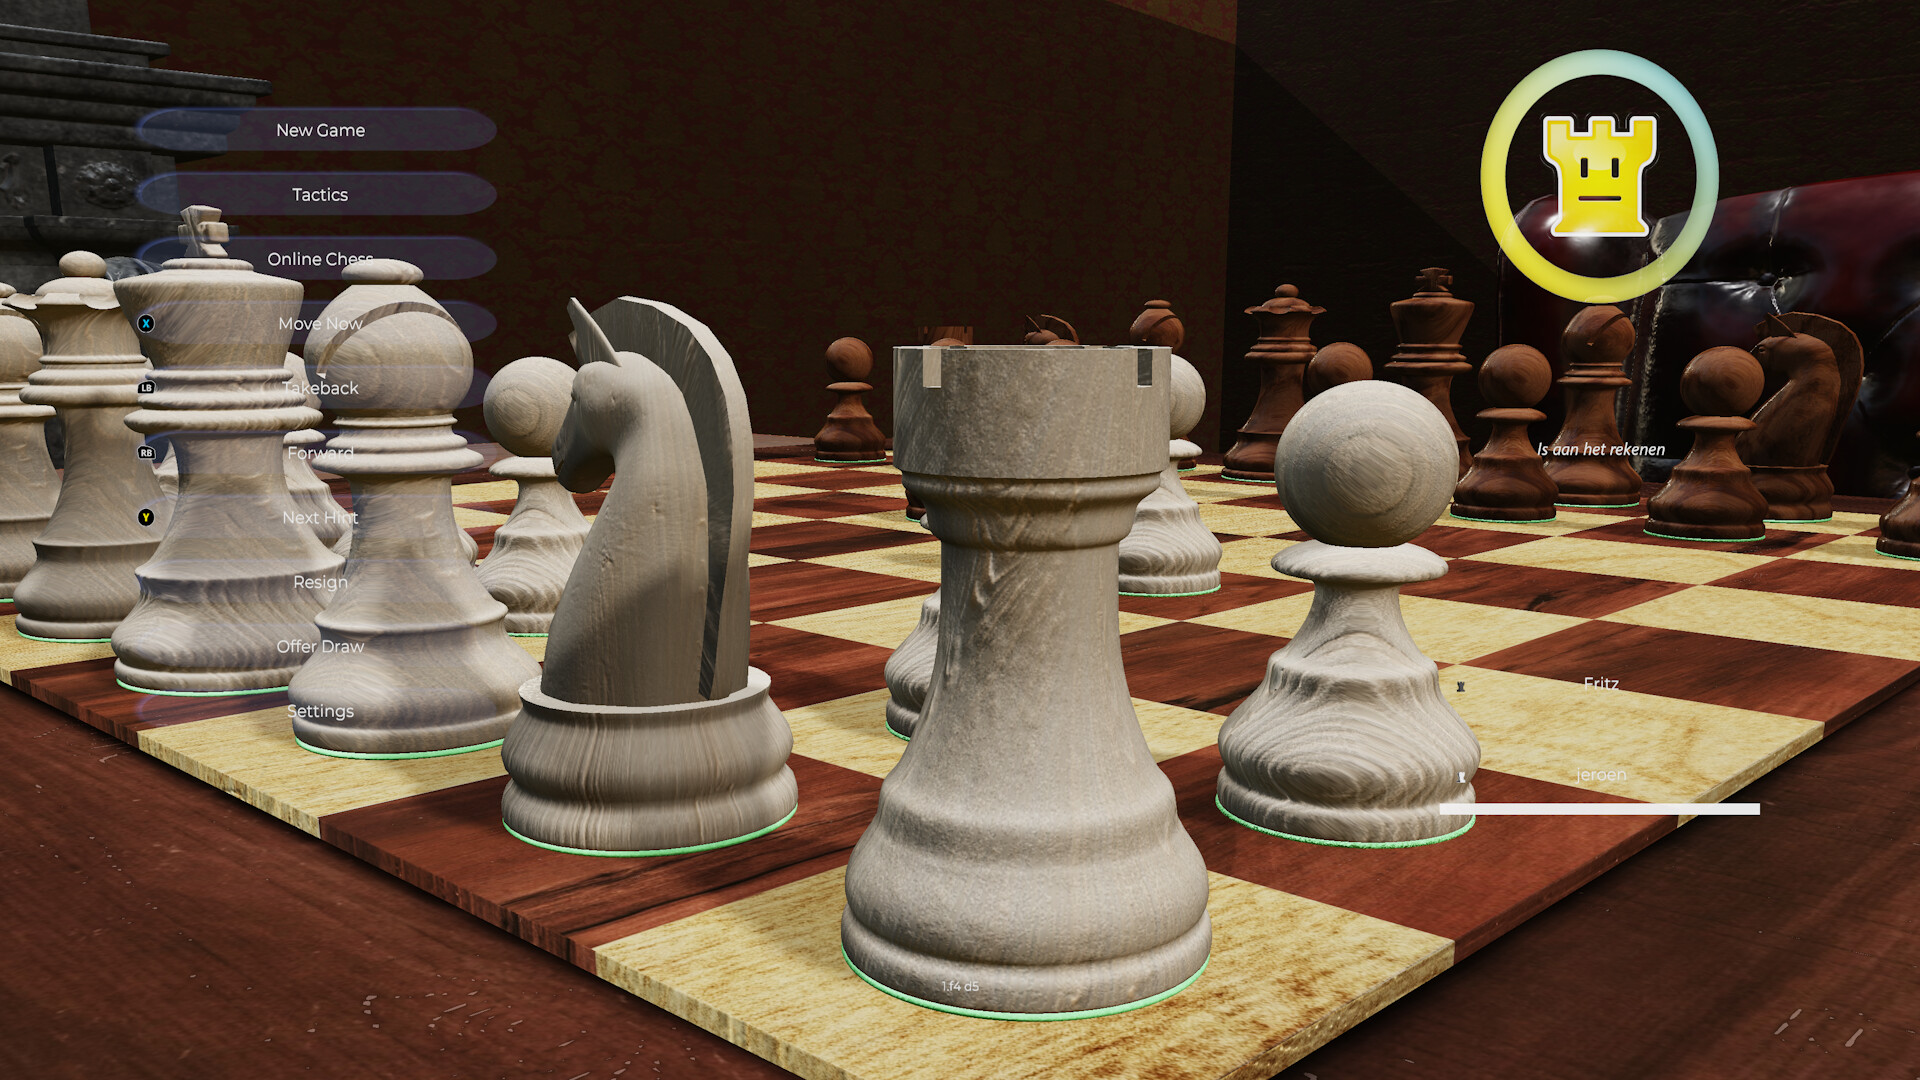 Best Chess Apps and PC Software for Playing and Training - TheChessWorld